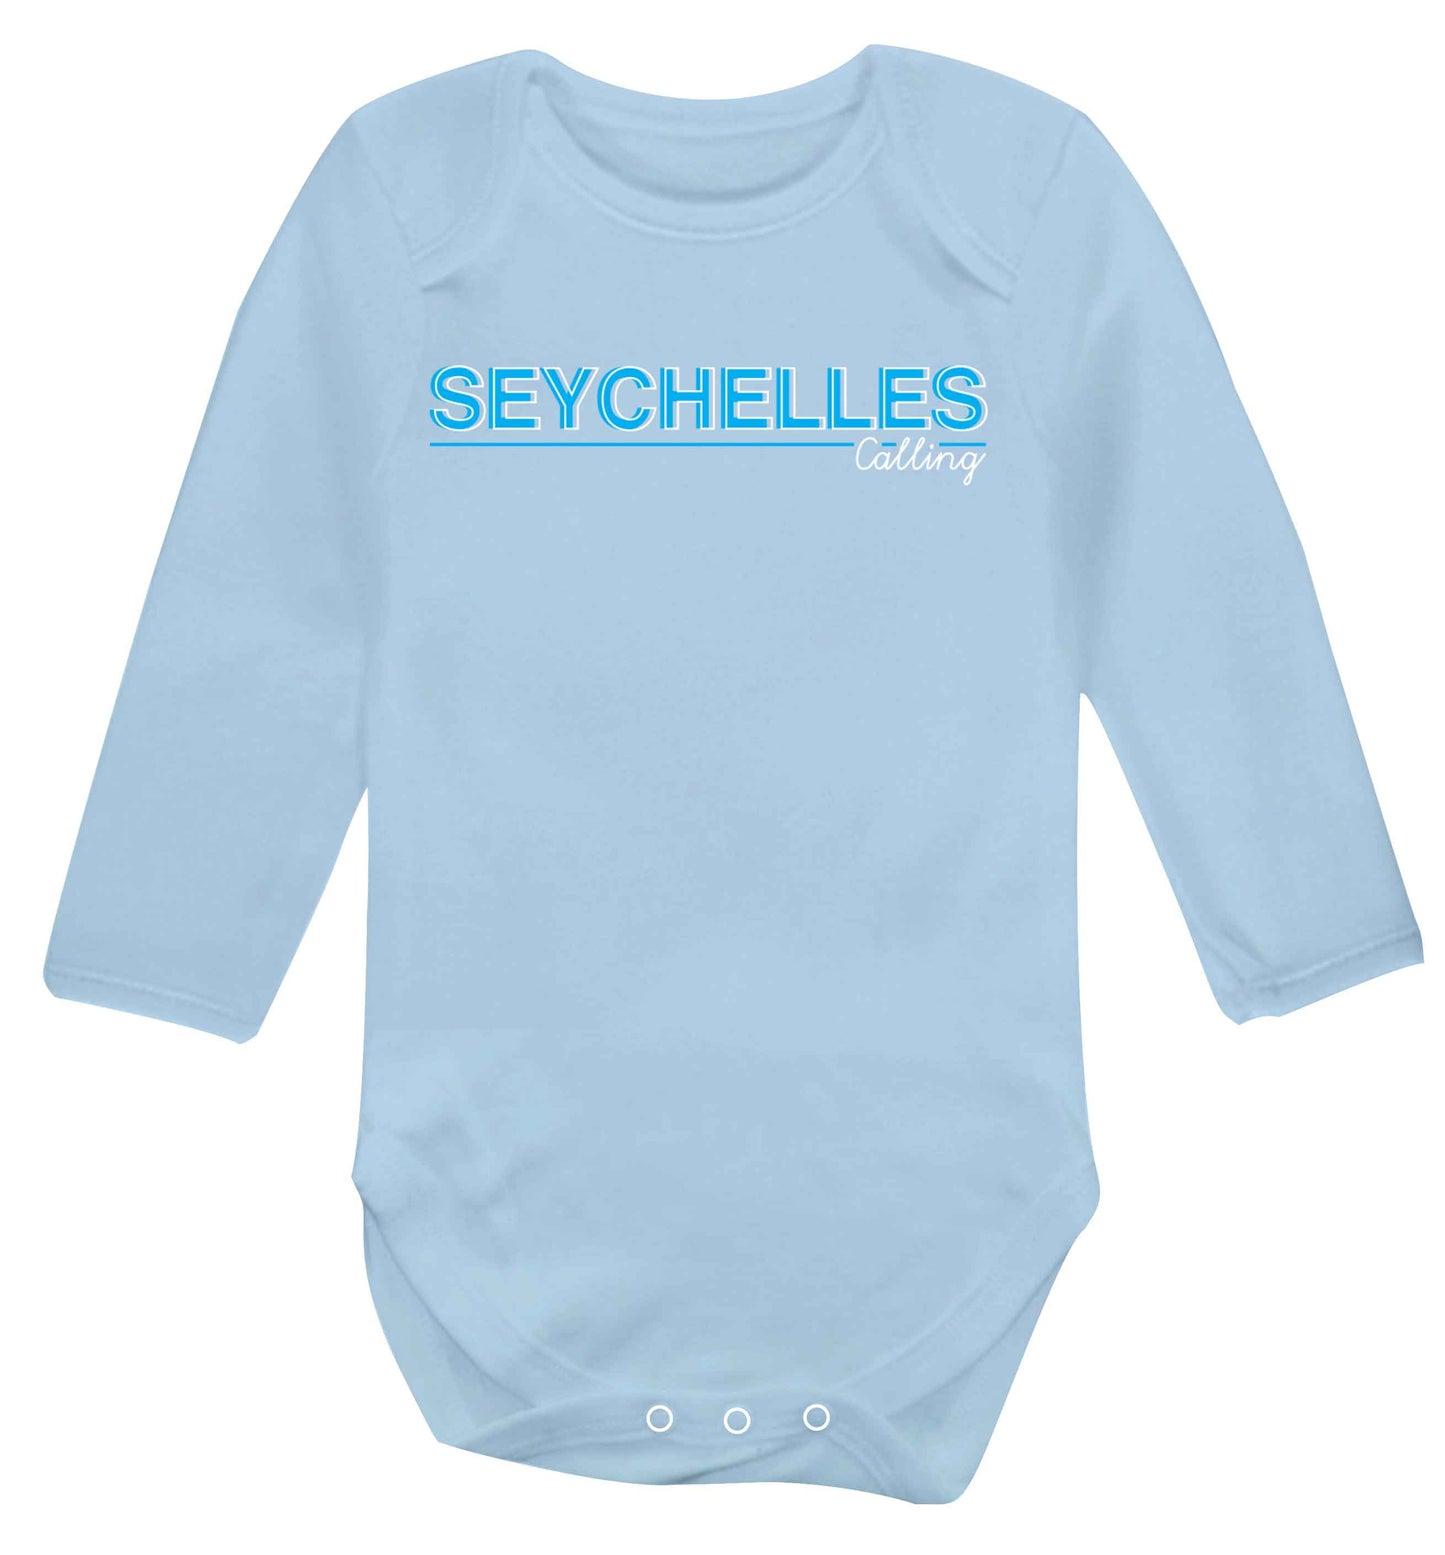 Seychelles calling Baby Vest long sleeved pale blue 6-12 months